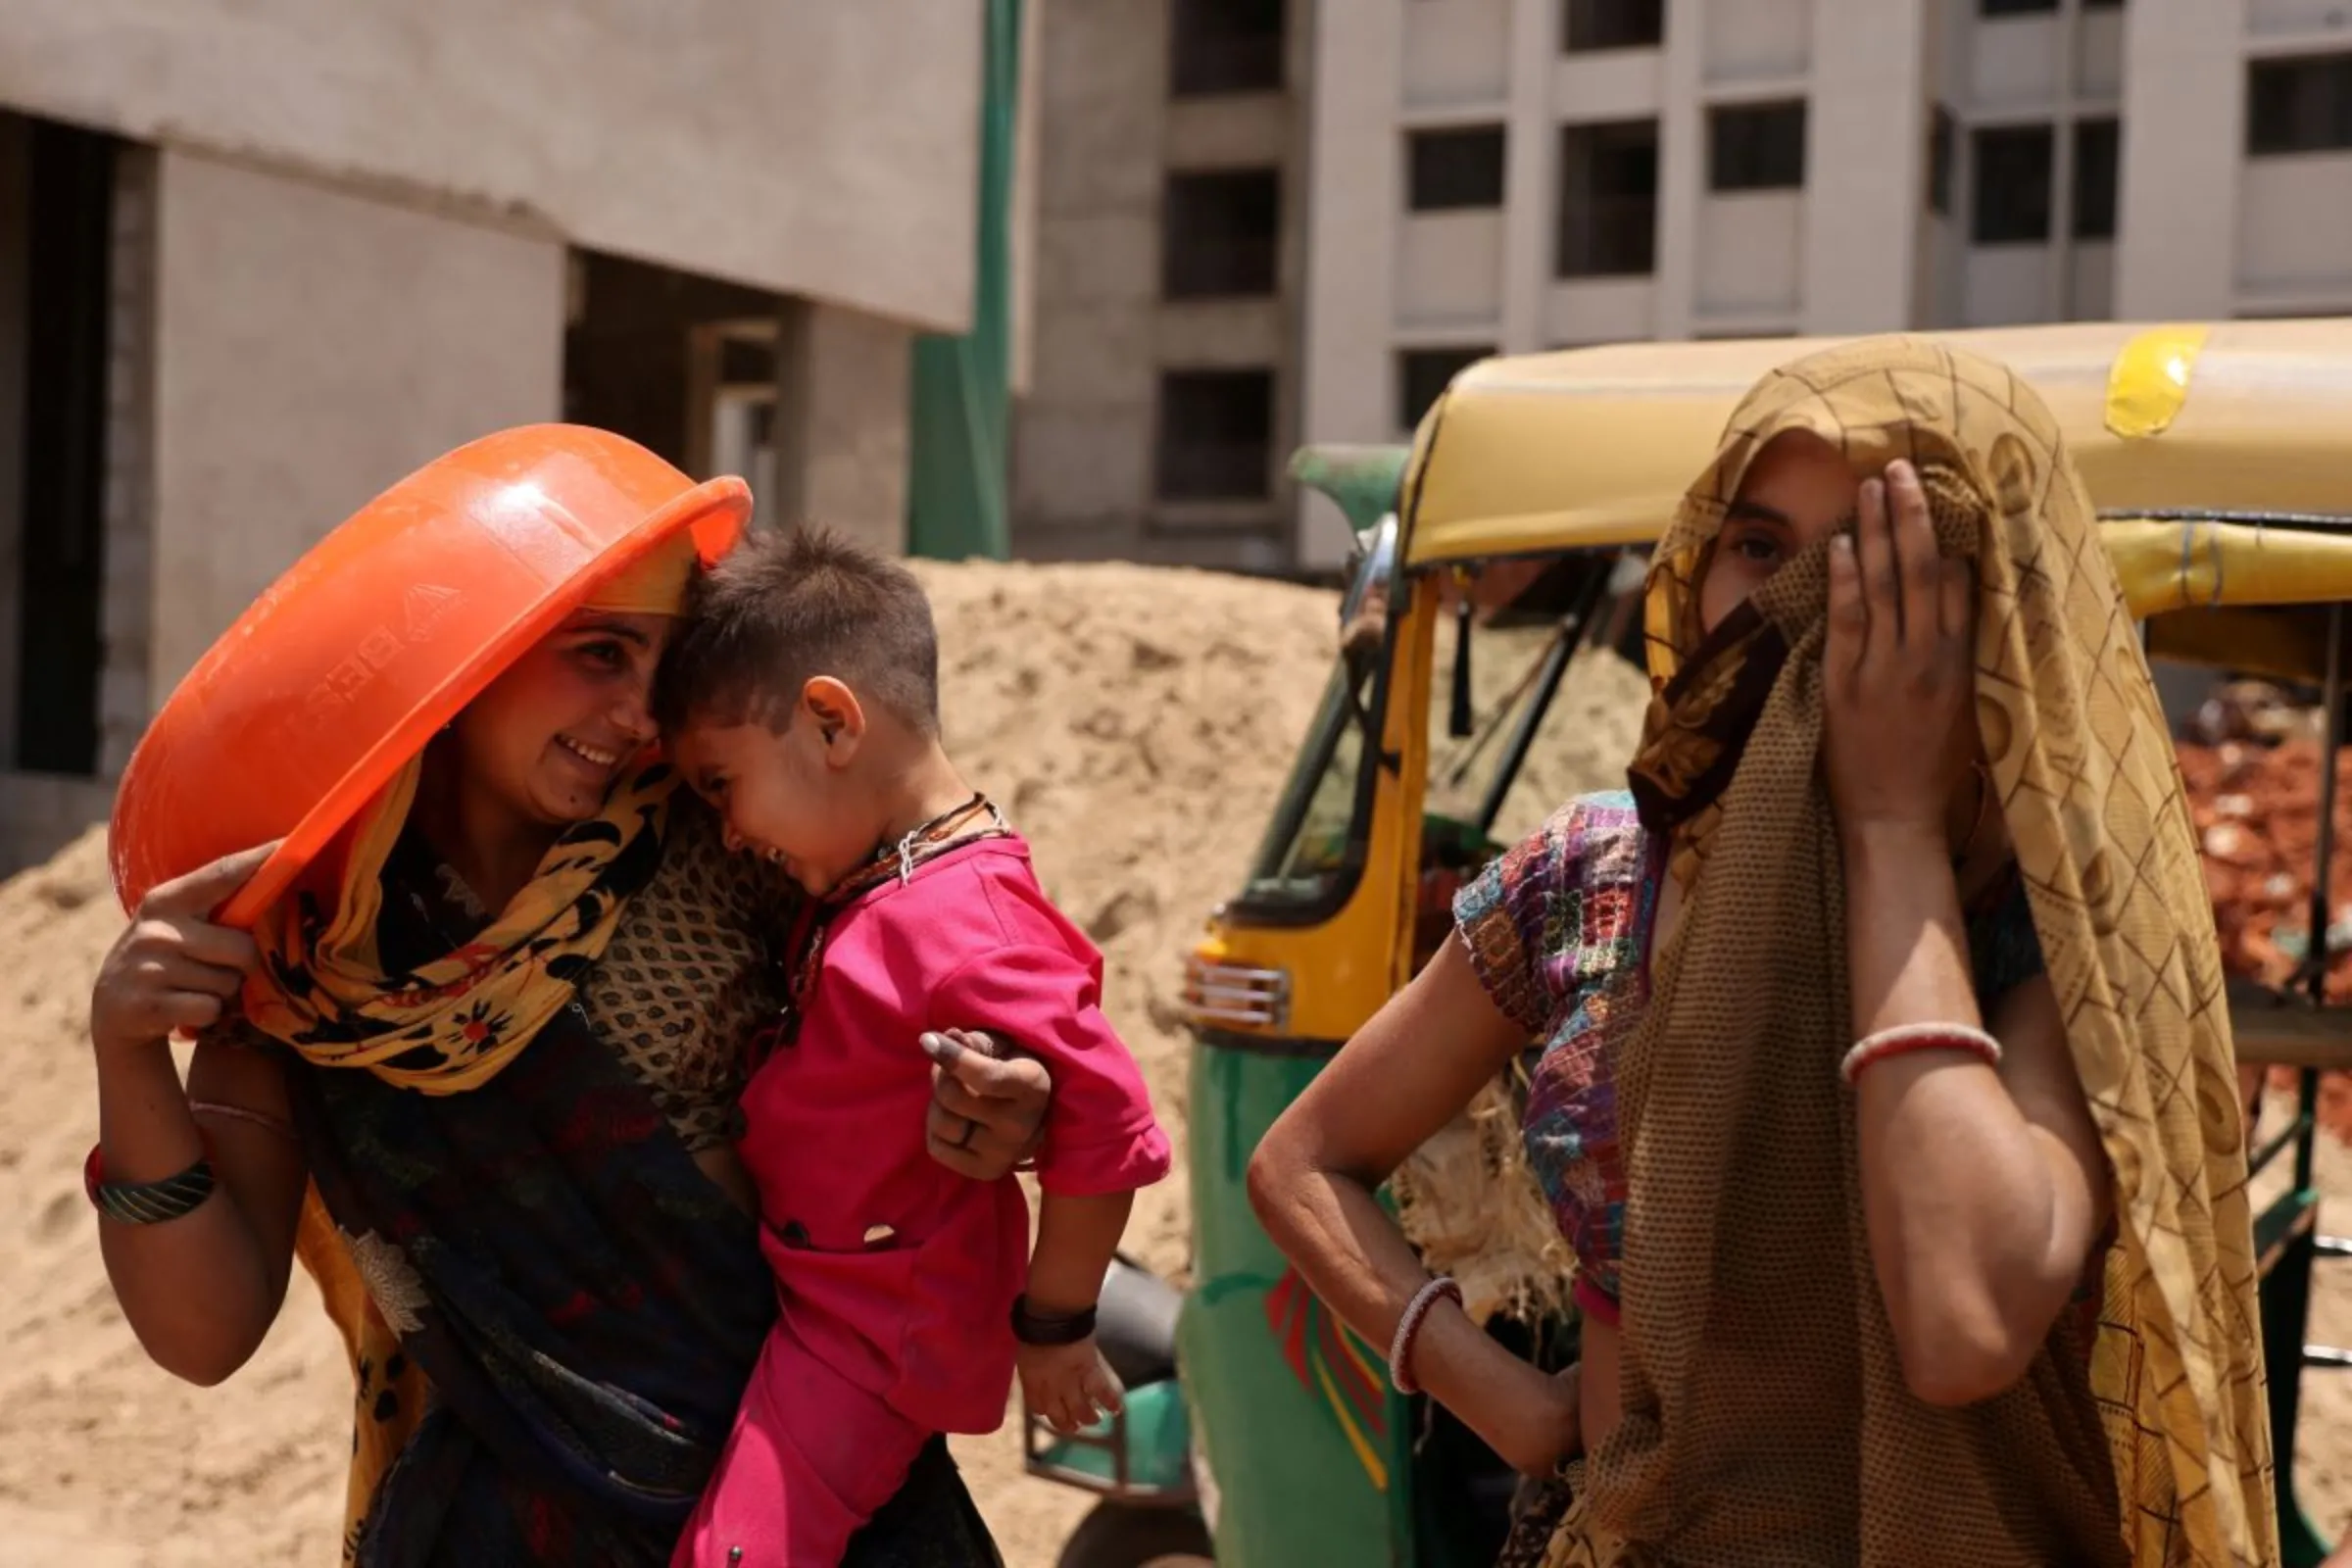 Women take shelter from the sun at a construction site in Ahmedabad, India, April 28, 2023